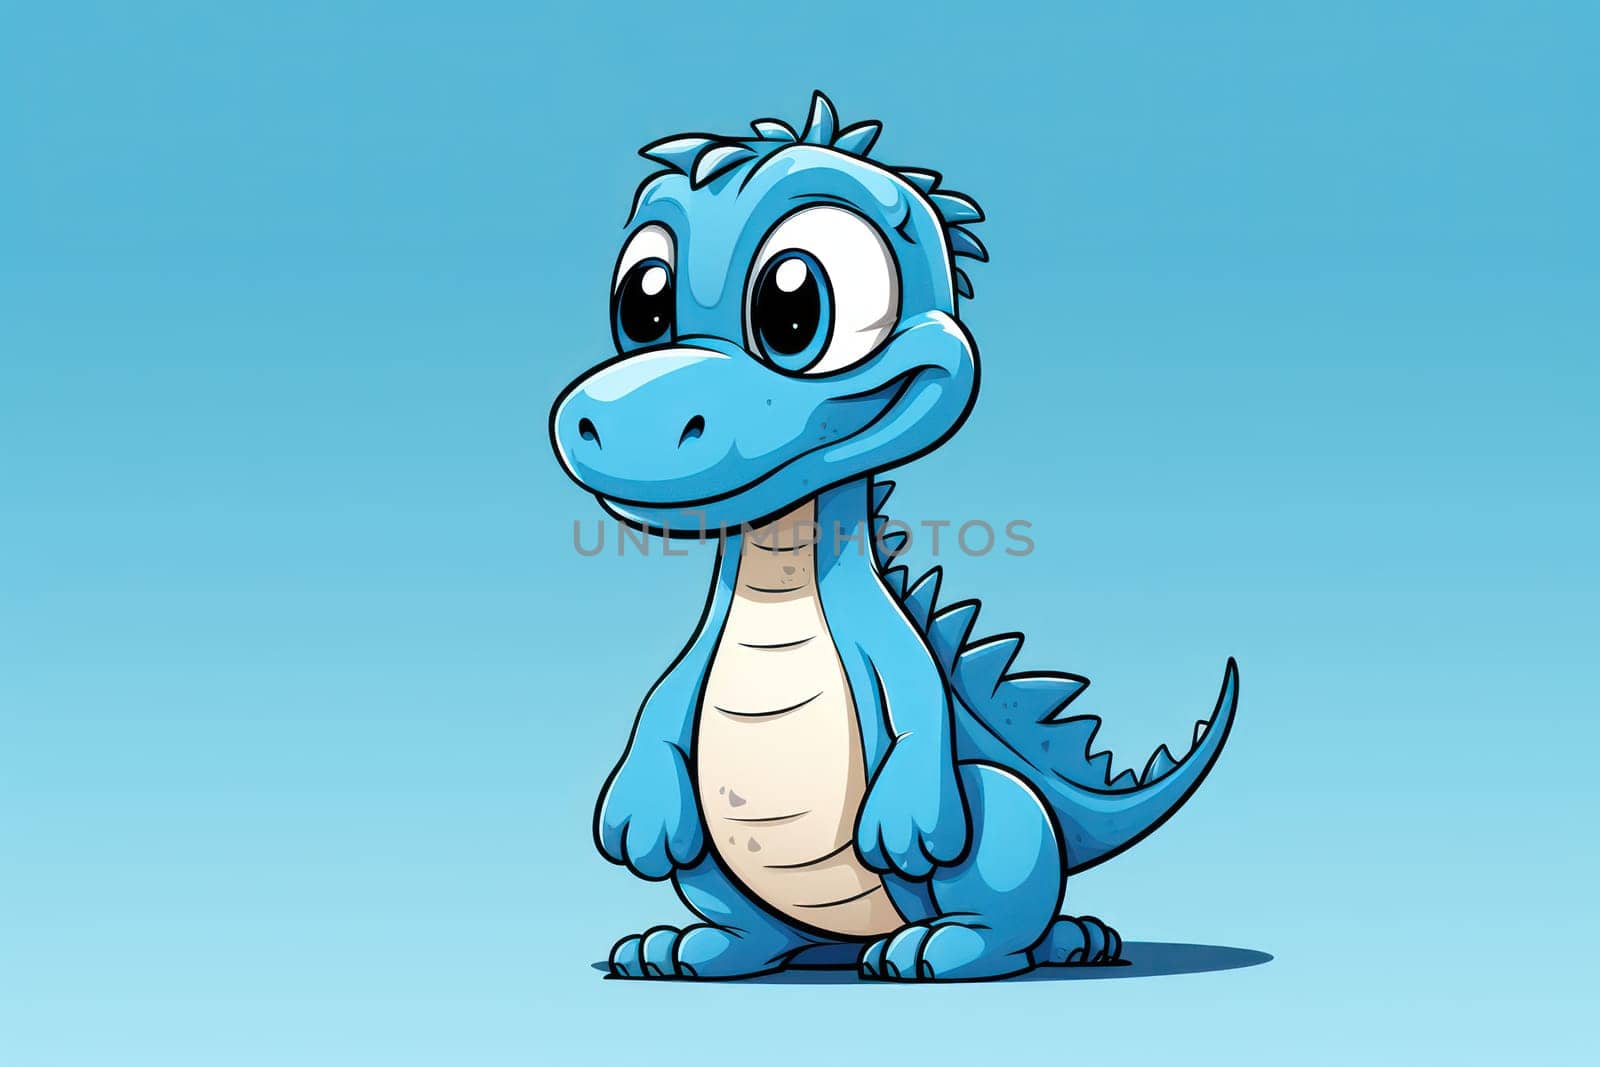 Cute Cartoon Dino: Fun and Friendly Jurassic Reptile Smiling in a Colorful African Landscape